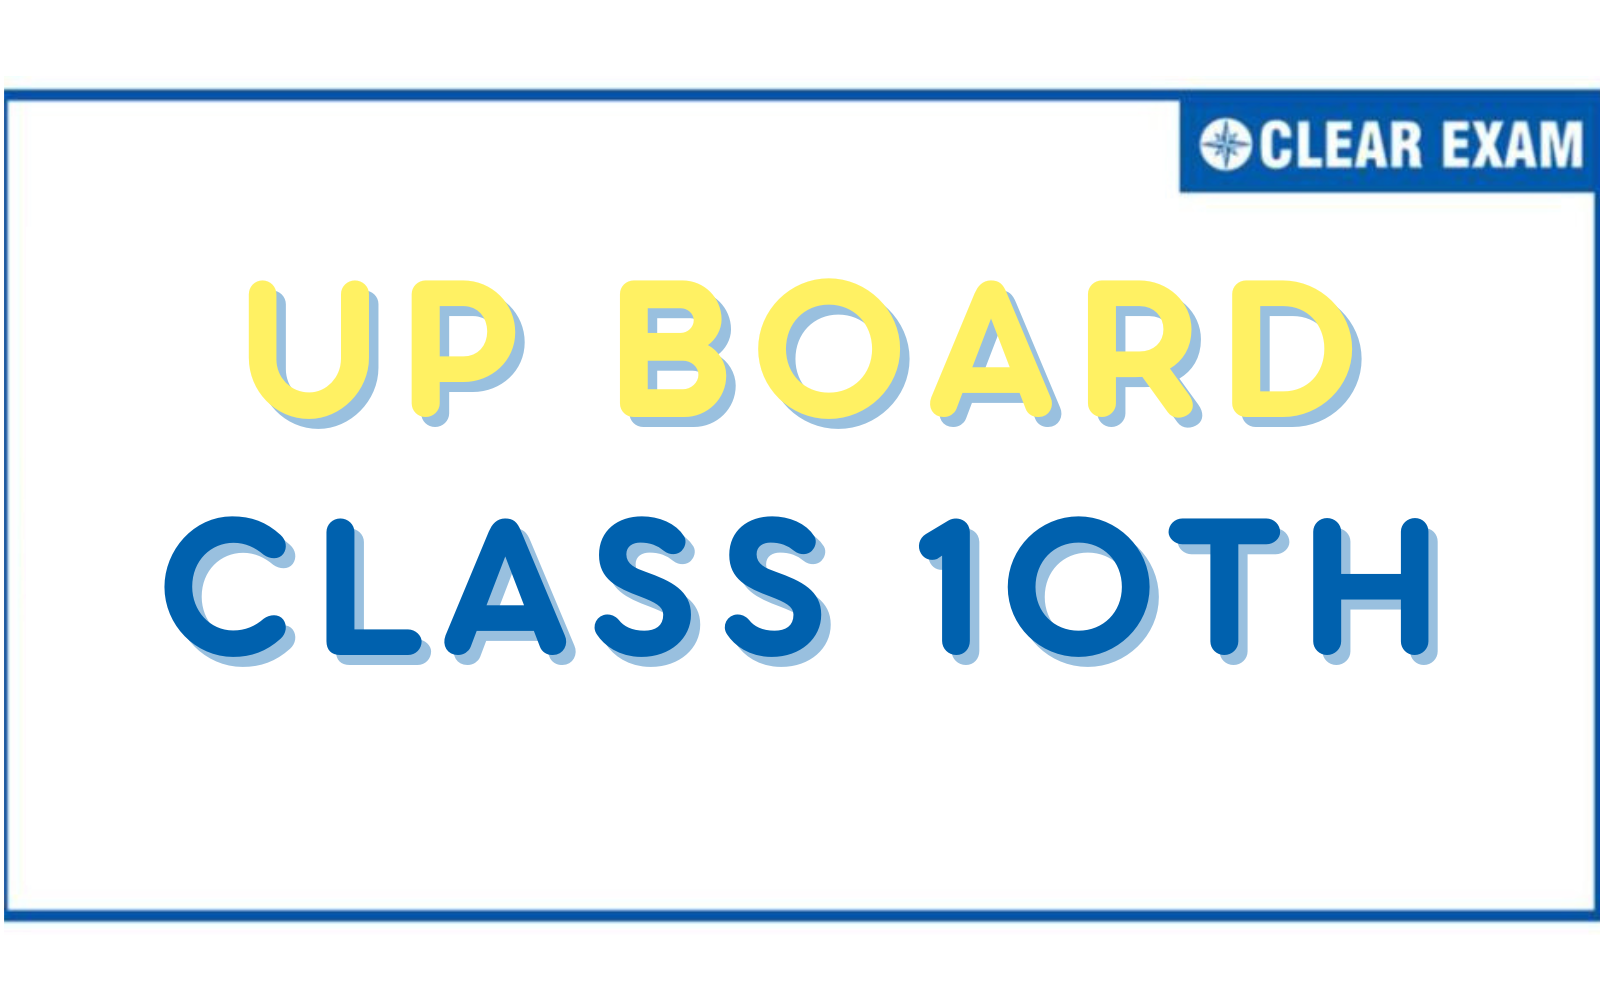 UP Board Class 10th Exam